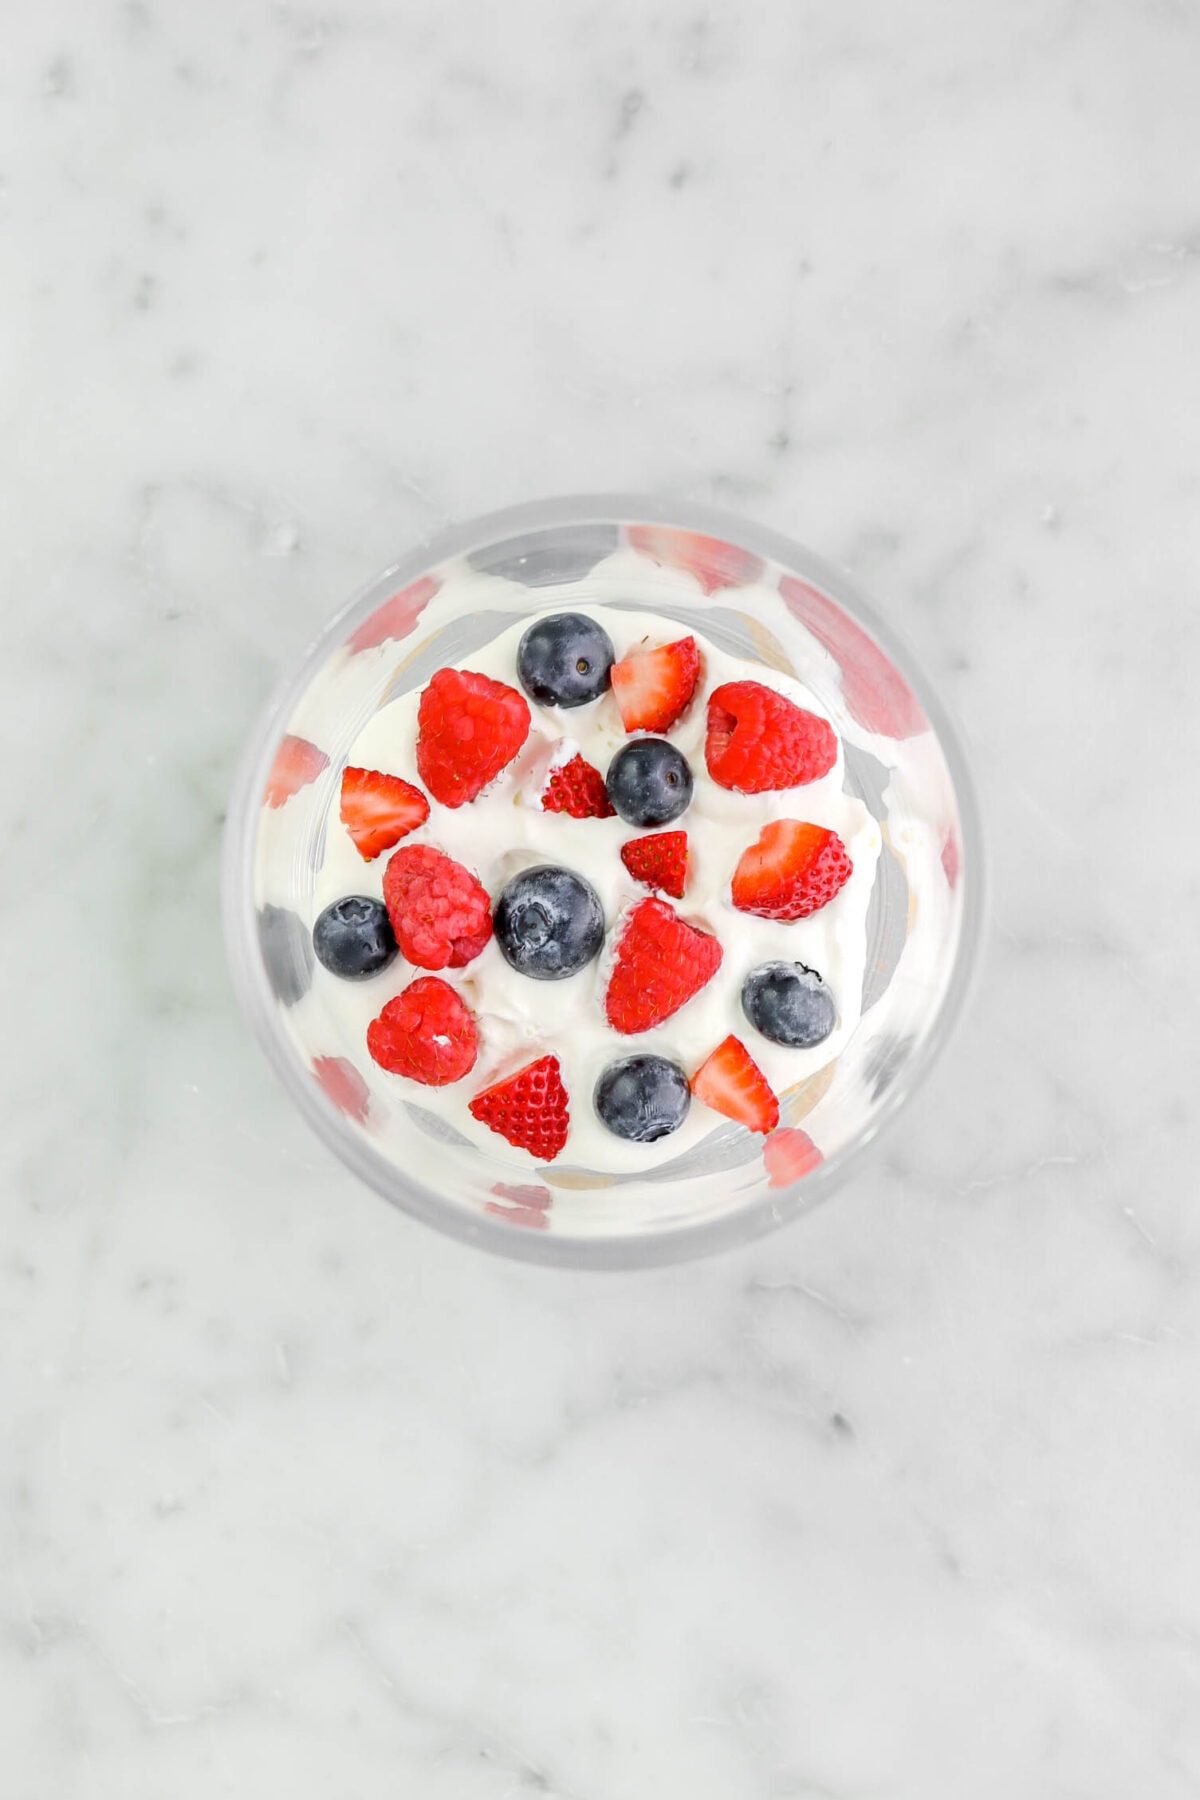 fresh berries added on top of whipped cream.